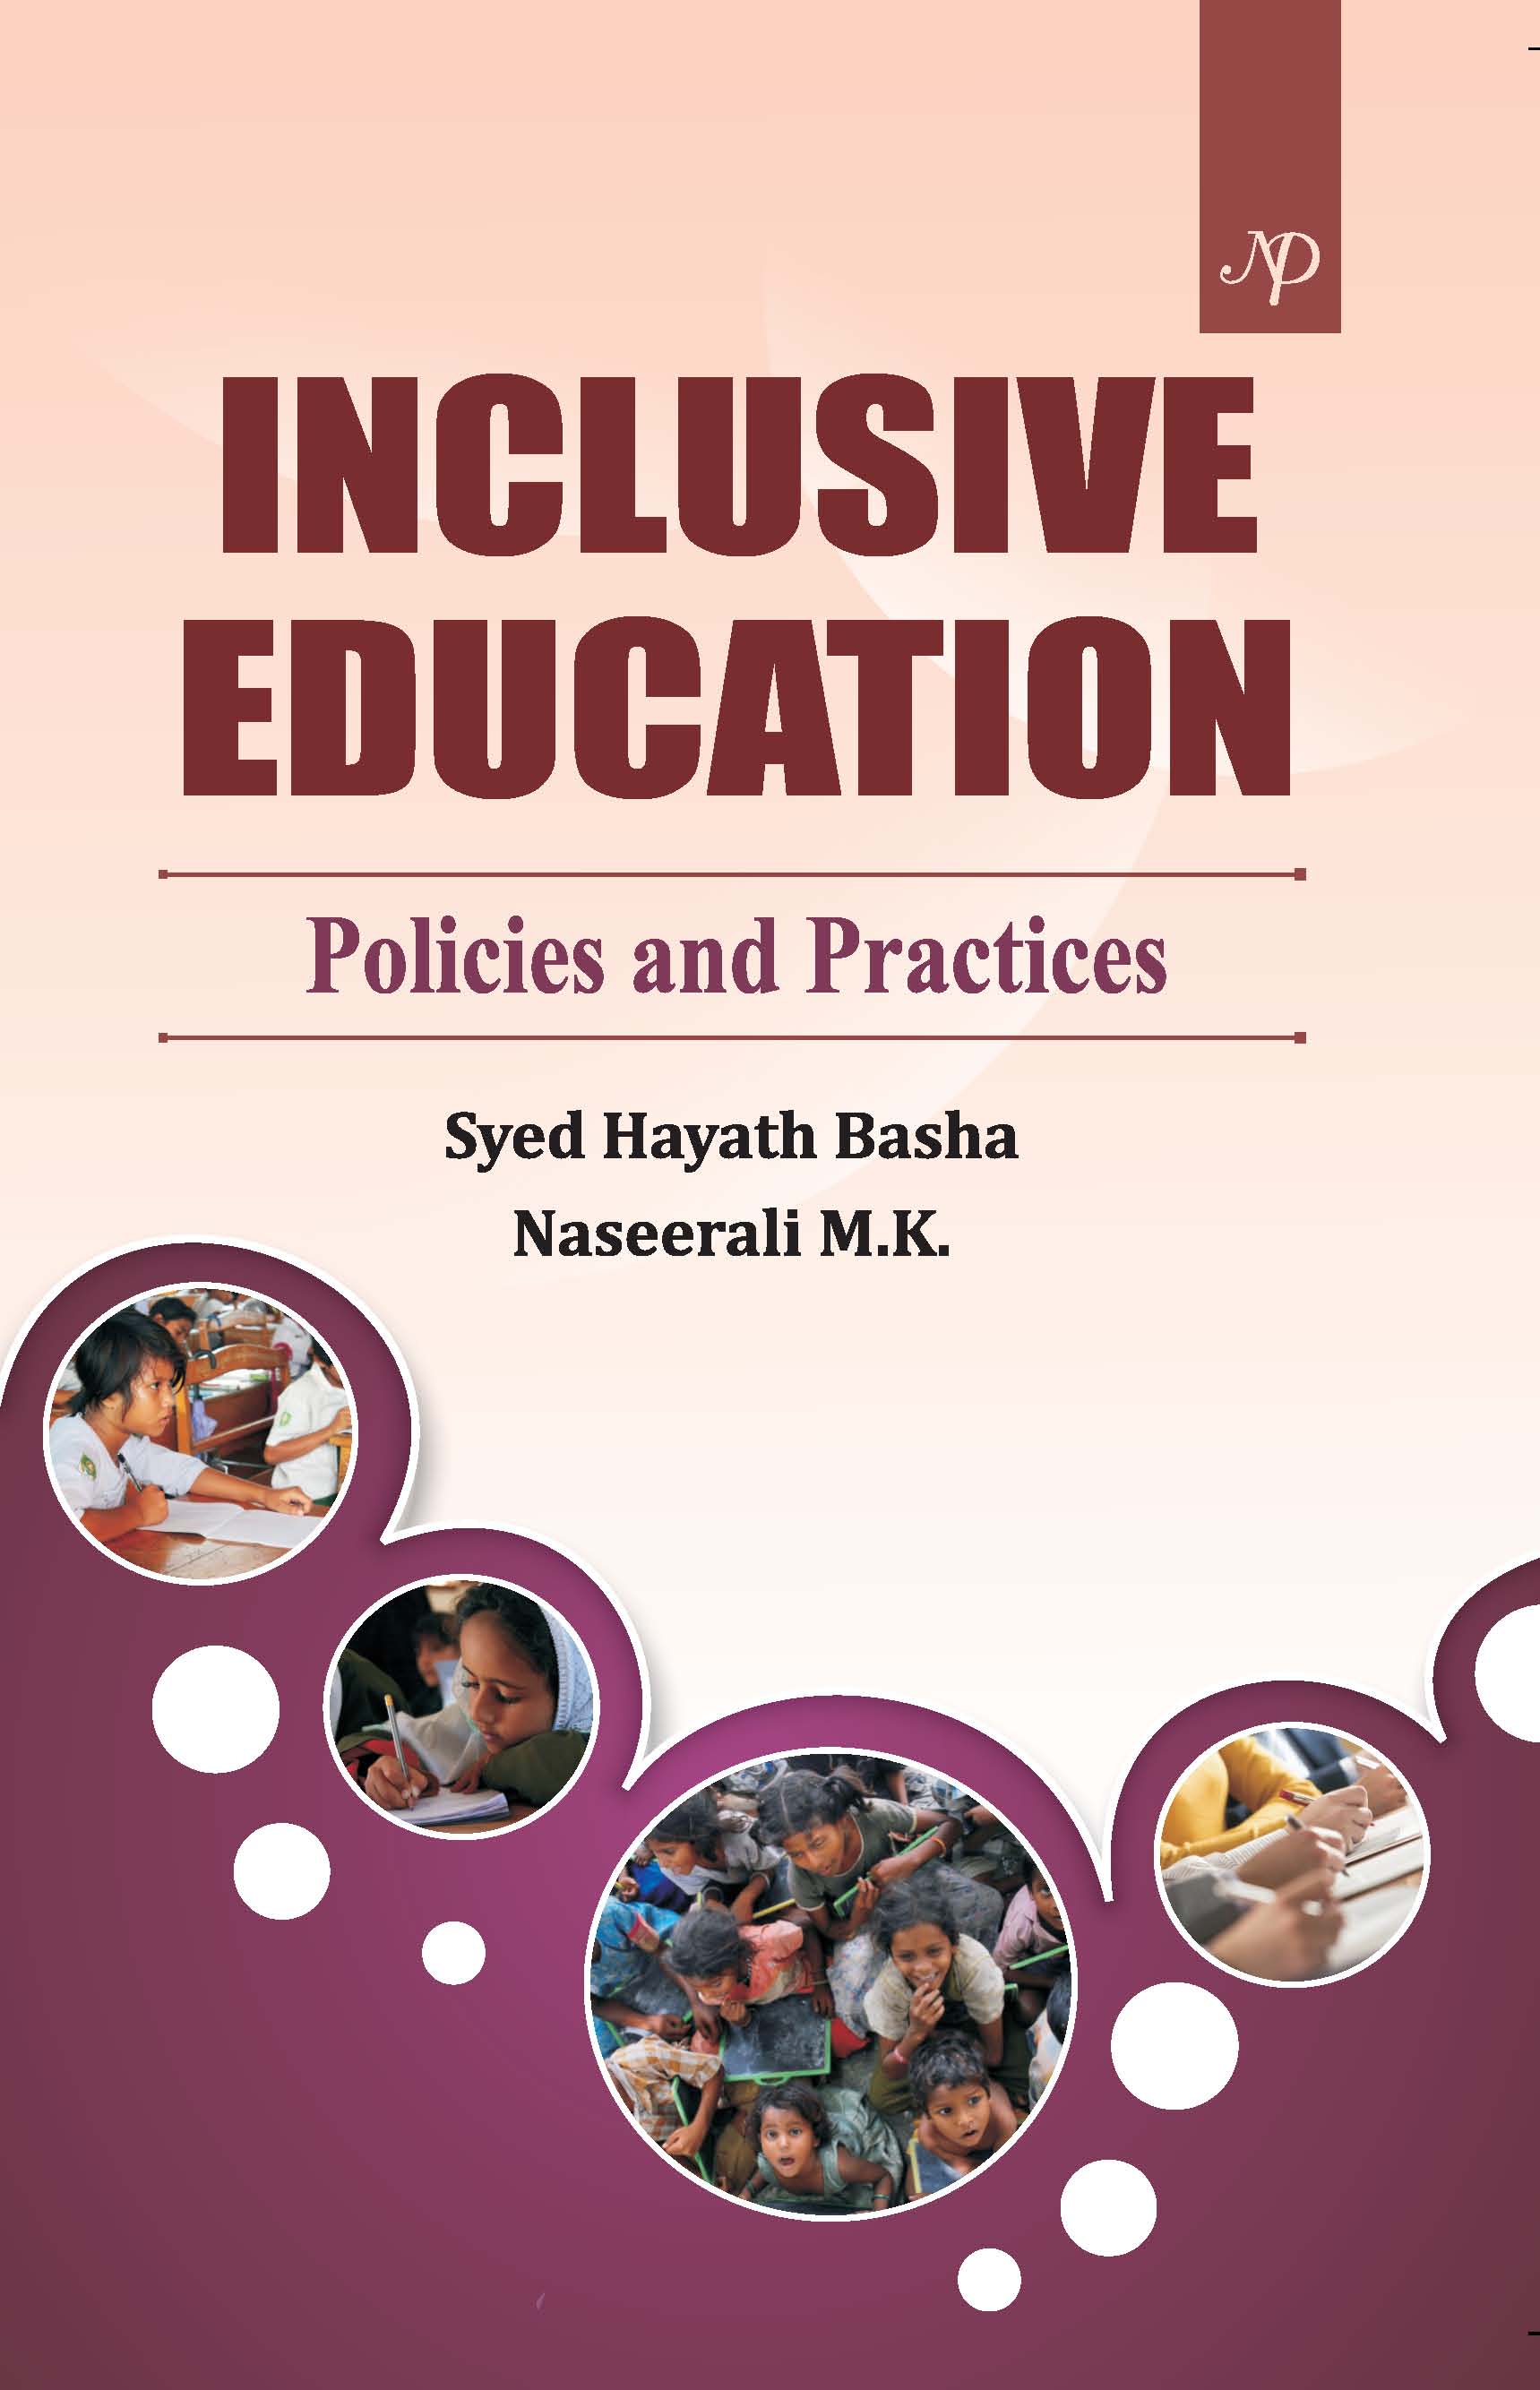 Inclusive Education Policies and practices.jpg